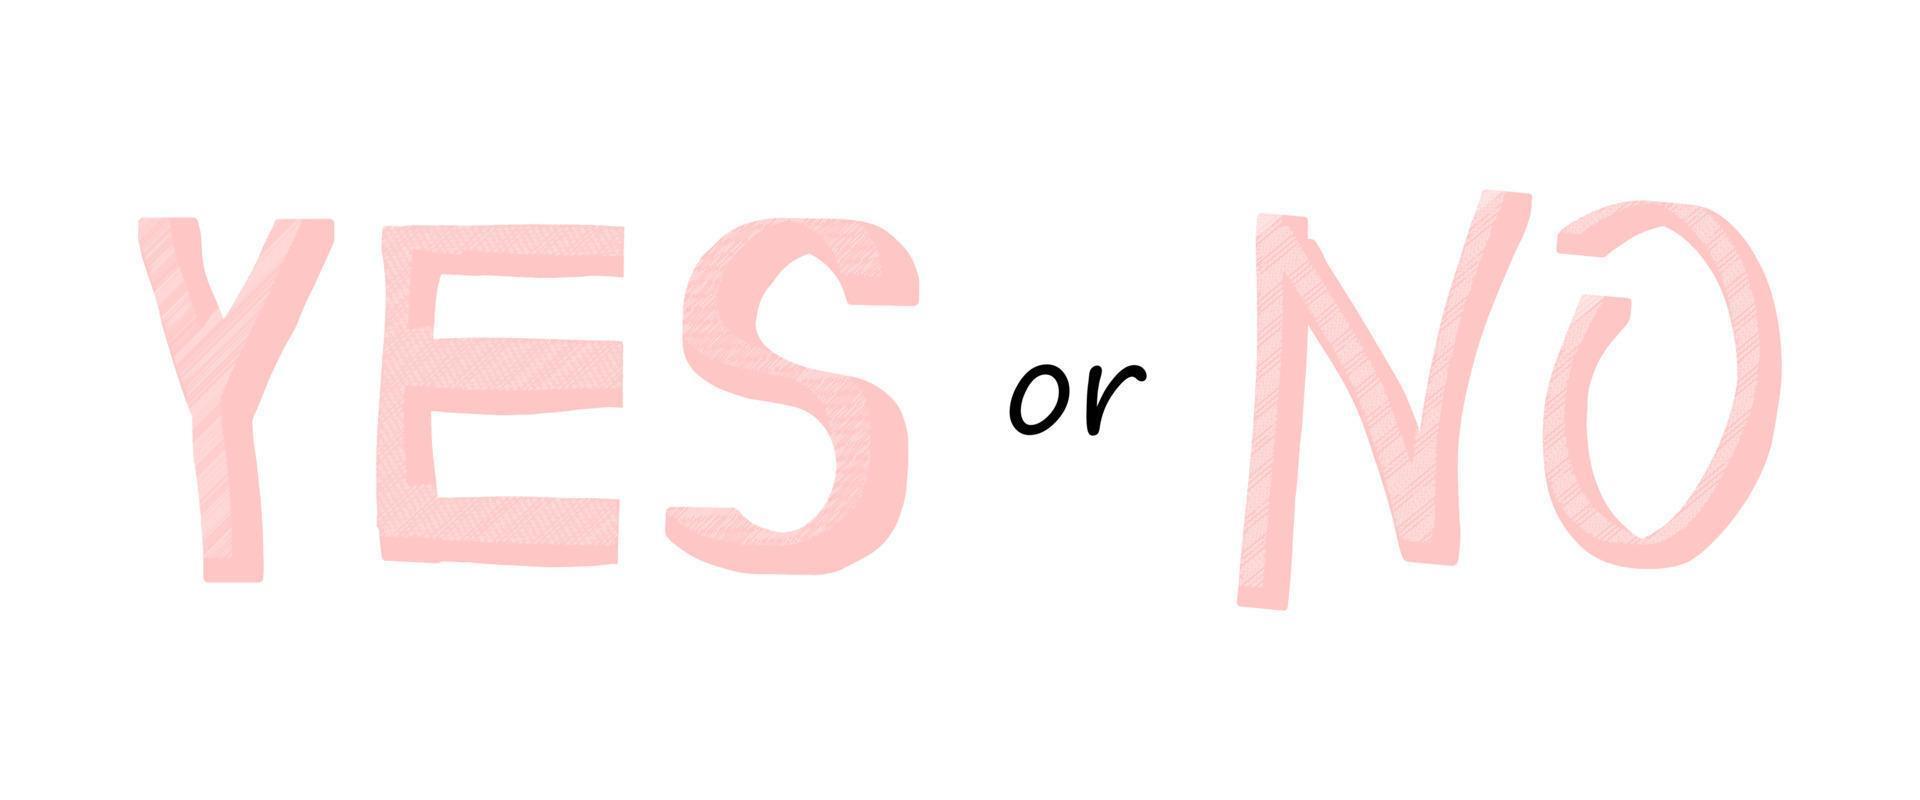 Yes or no. Handwritten lettering illustration. Pink vector text speech. Simple hand drawn textured paintbrush style drawing.